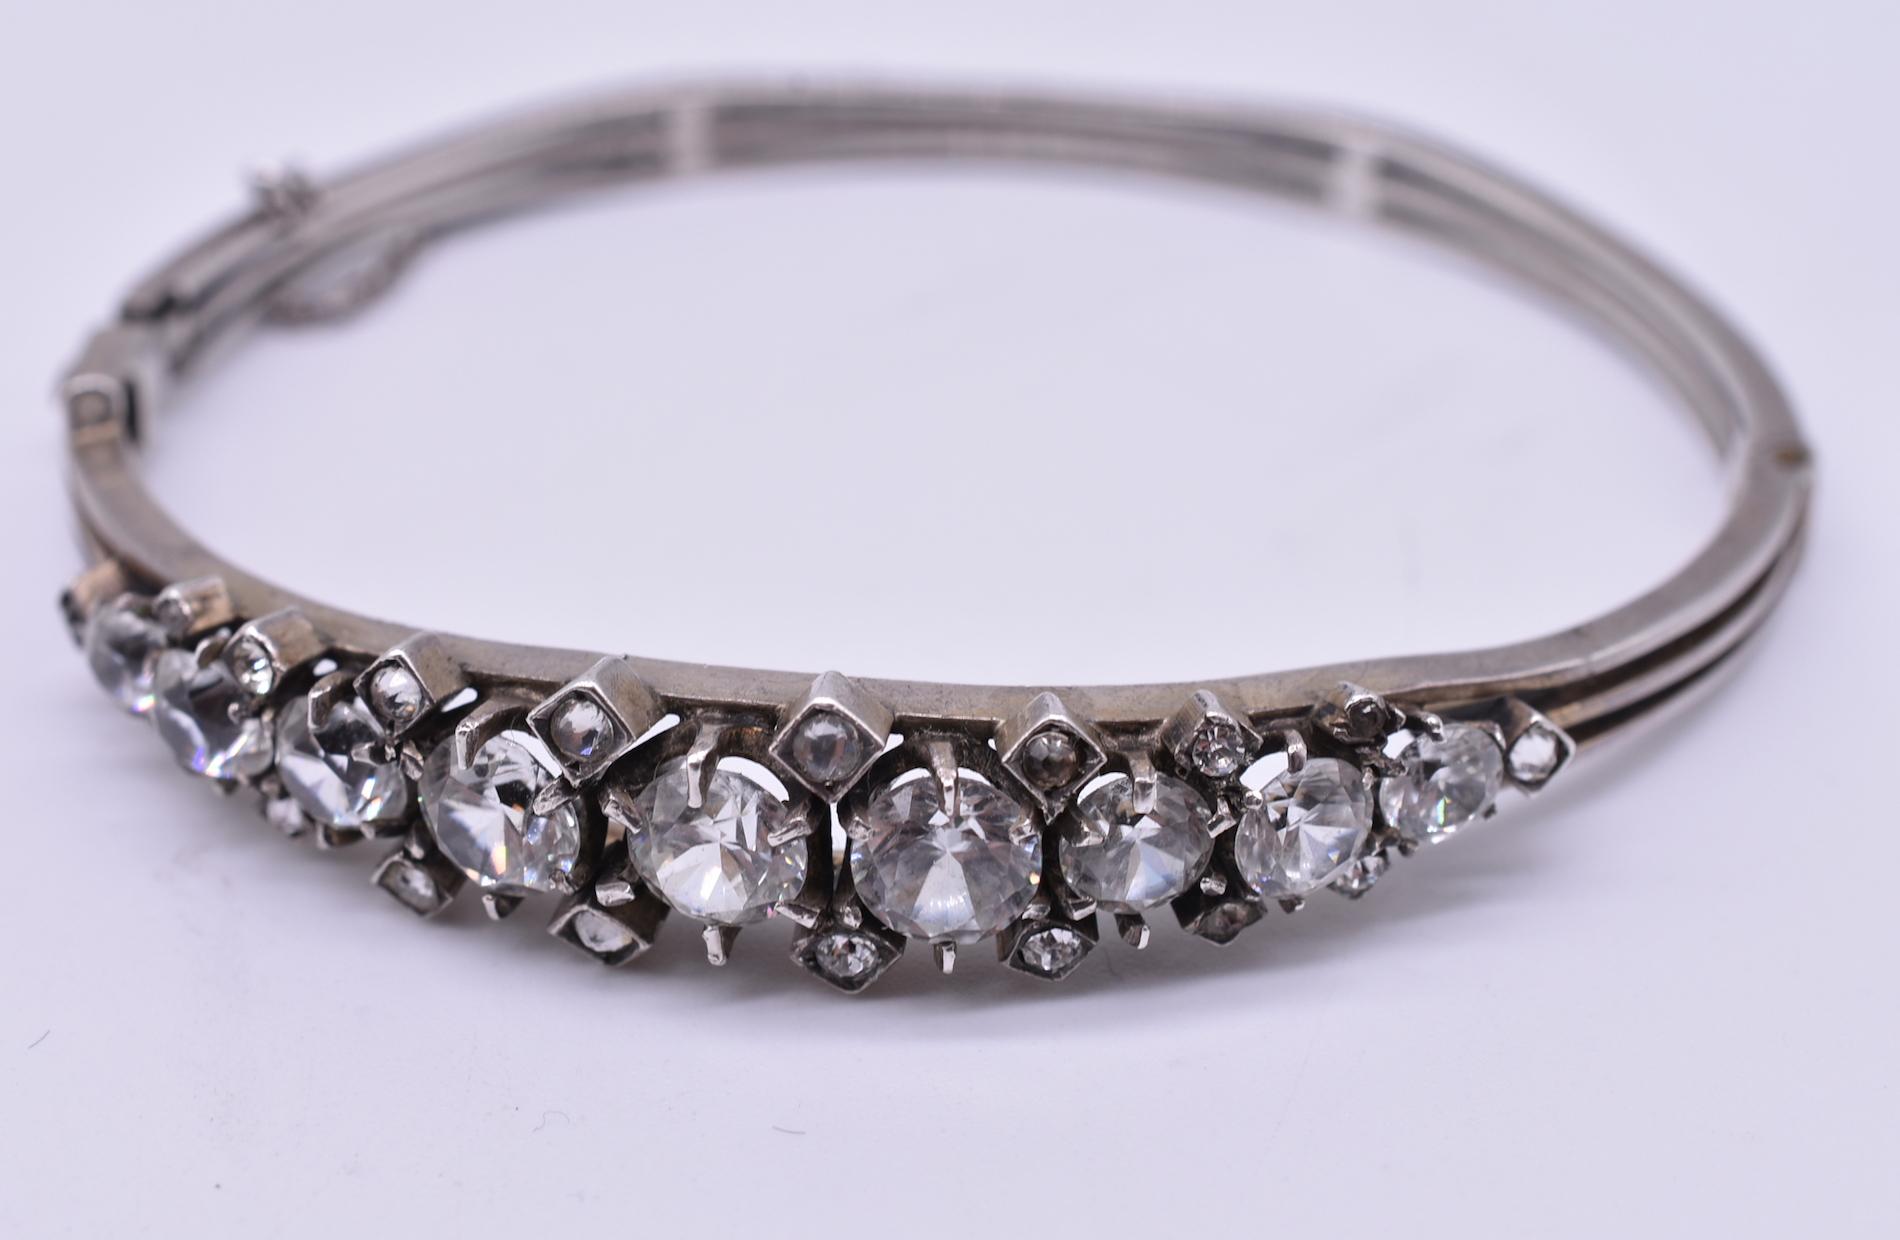 Fun silver bangle made from paste, which easily transitions from casual wear to a night on the town. Paste stones are made from leaded glass, the formula for which was perfected in the 18th century by a jeweler name Georges-Frederic Stras and soon